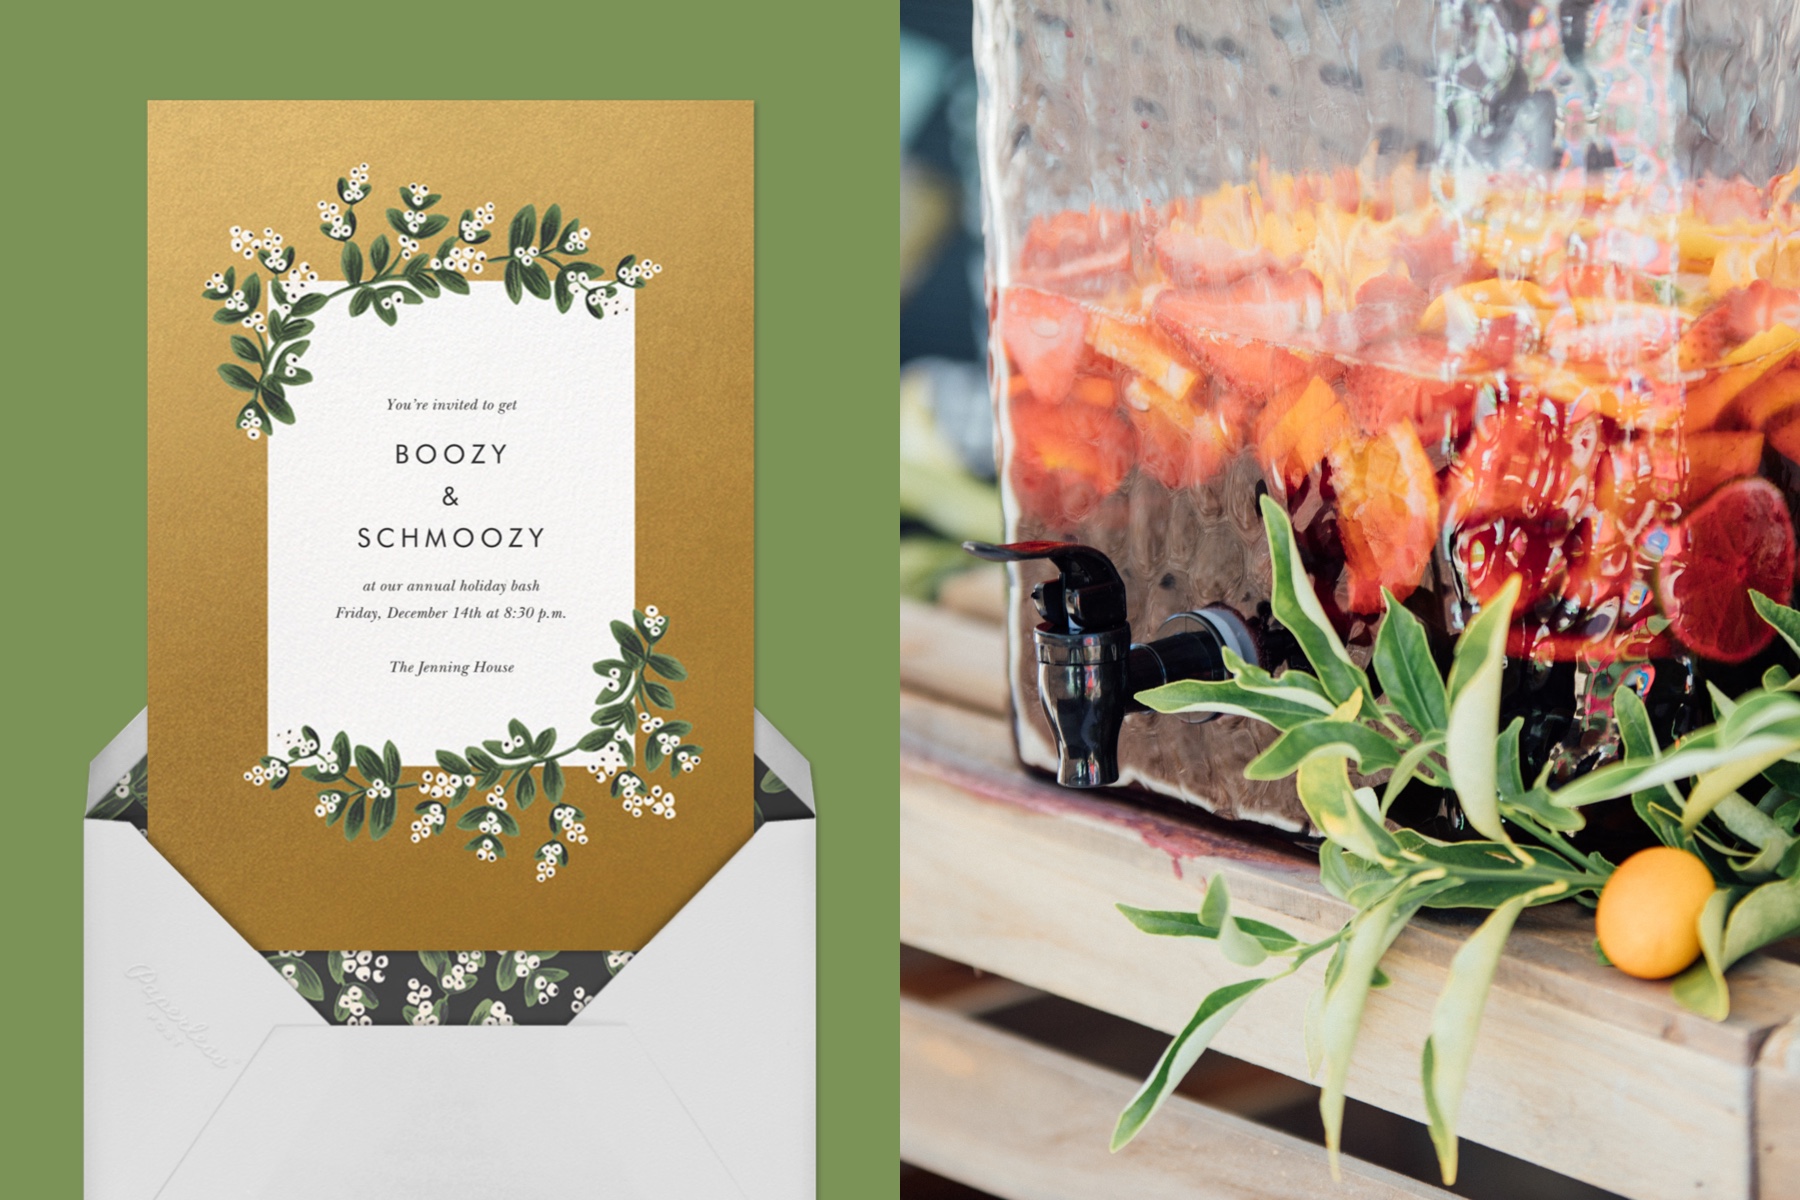 Left: A holiday invitation with floral accents reads “Boozy and Schmoozy.” Right: A large format, fruit-infused drink in a beverage dispenser. 